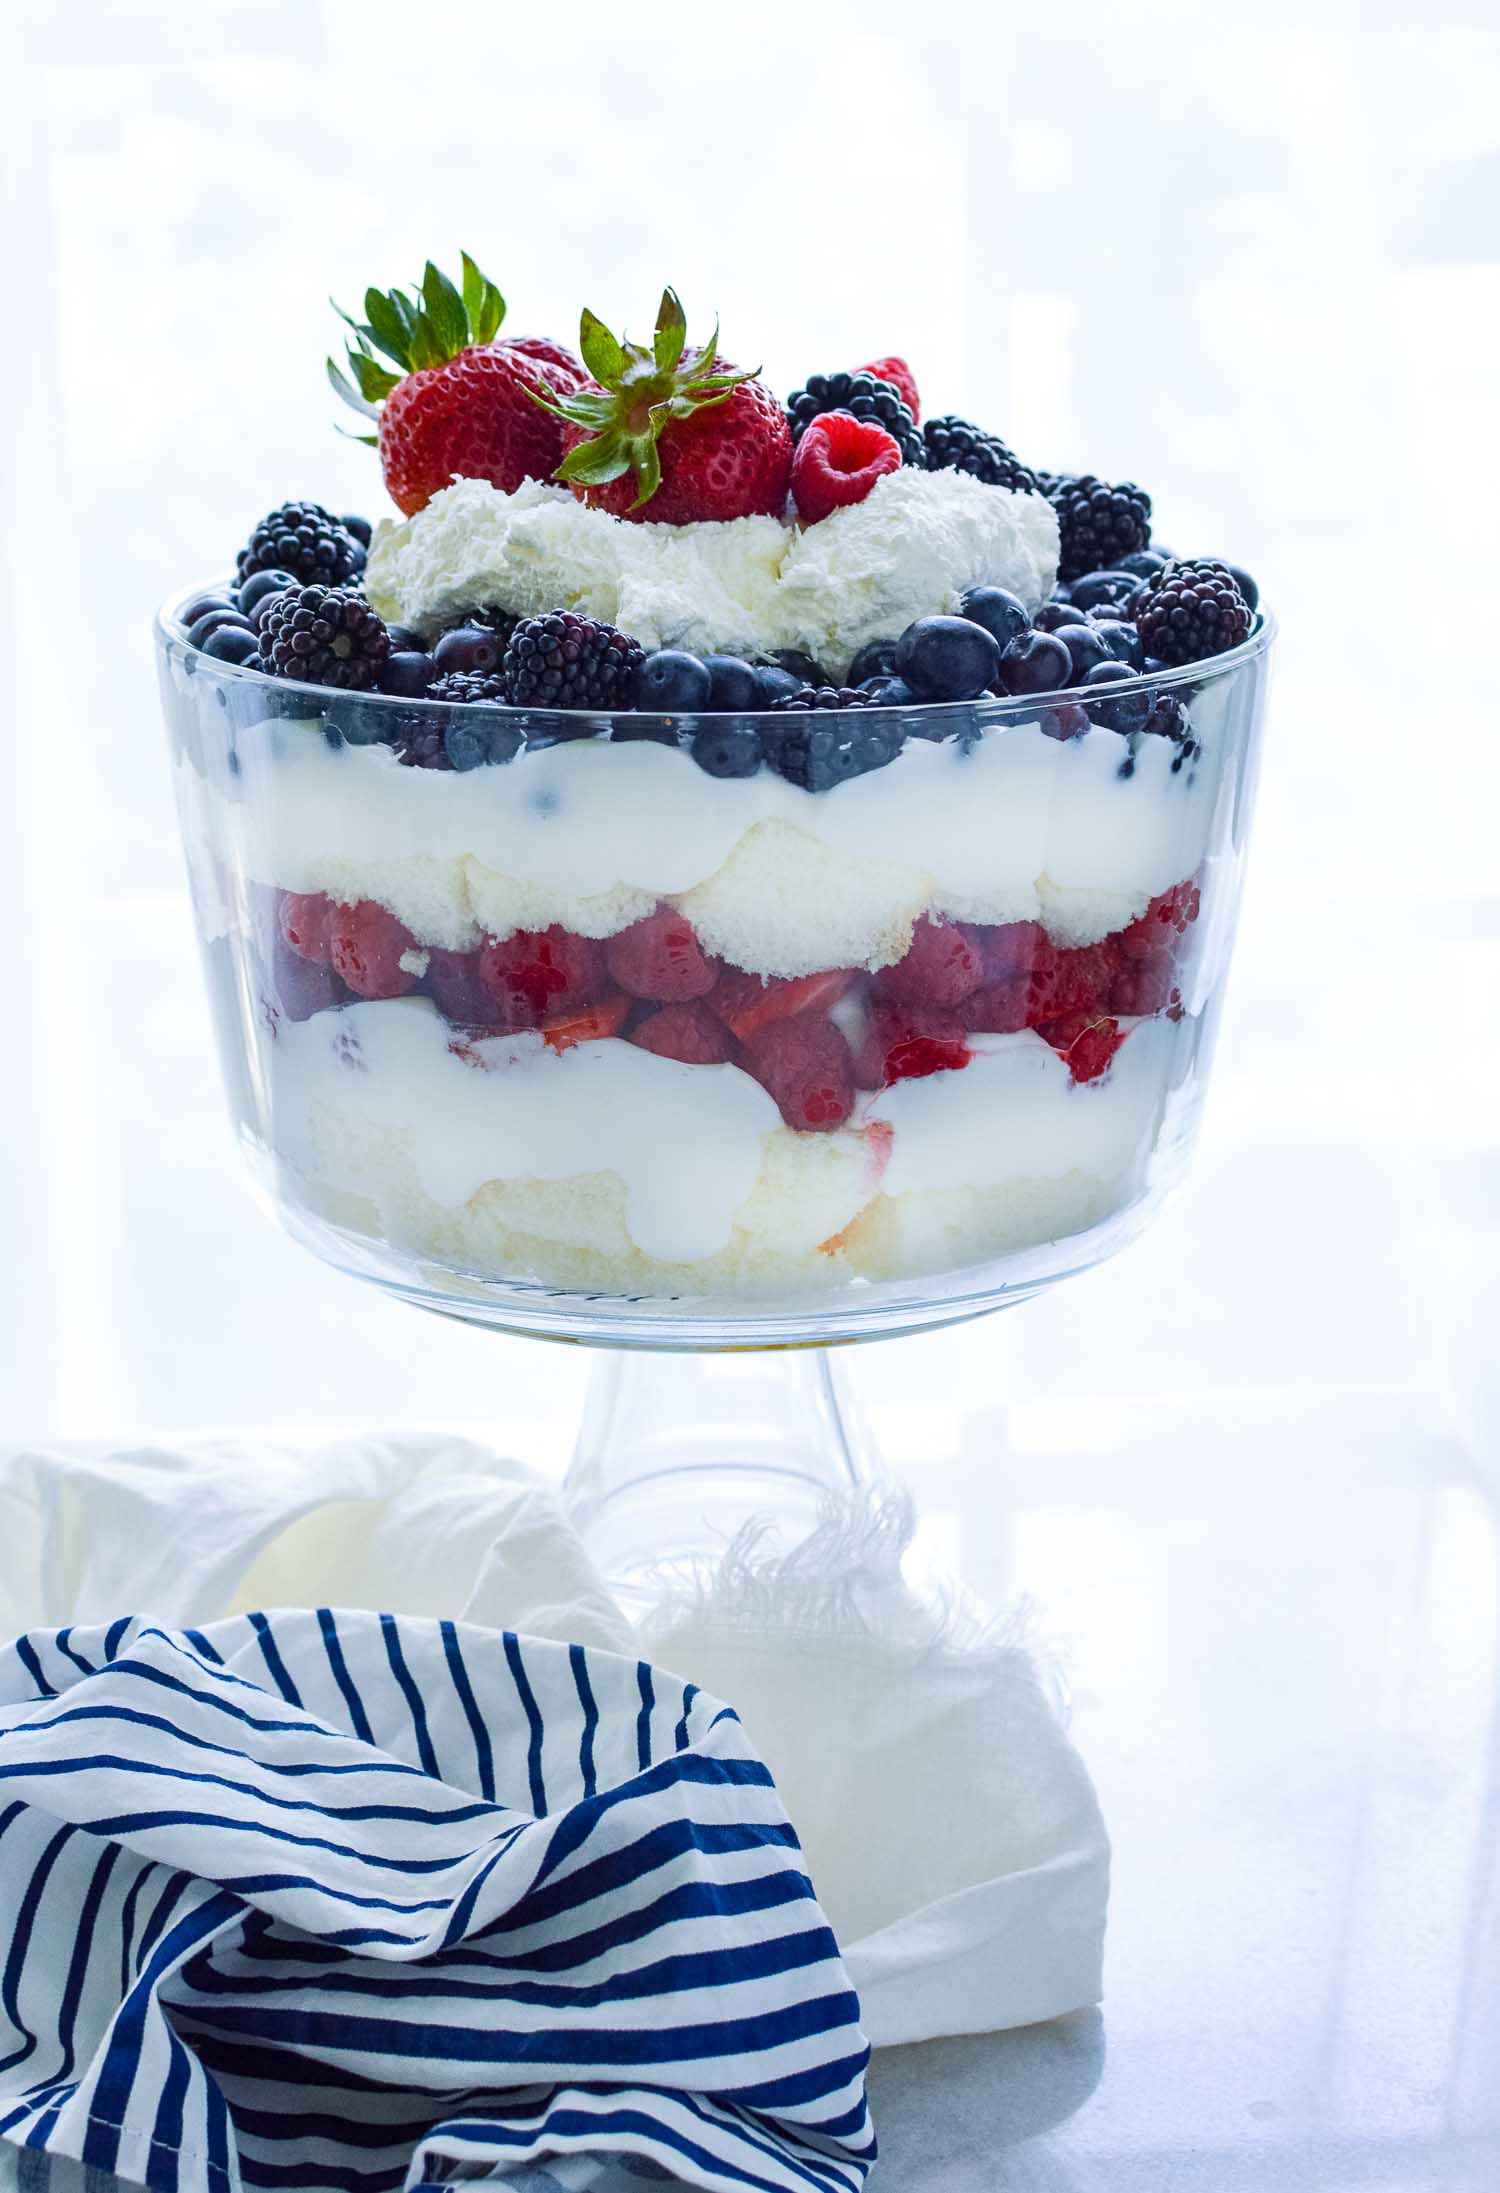 A clear glass trifle dish filled with cake, berries, and cream with a blue and white towel around the bottom.